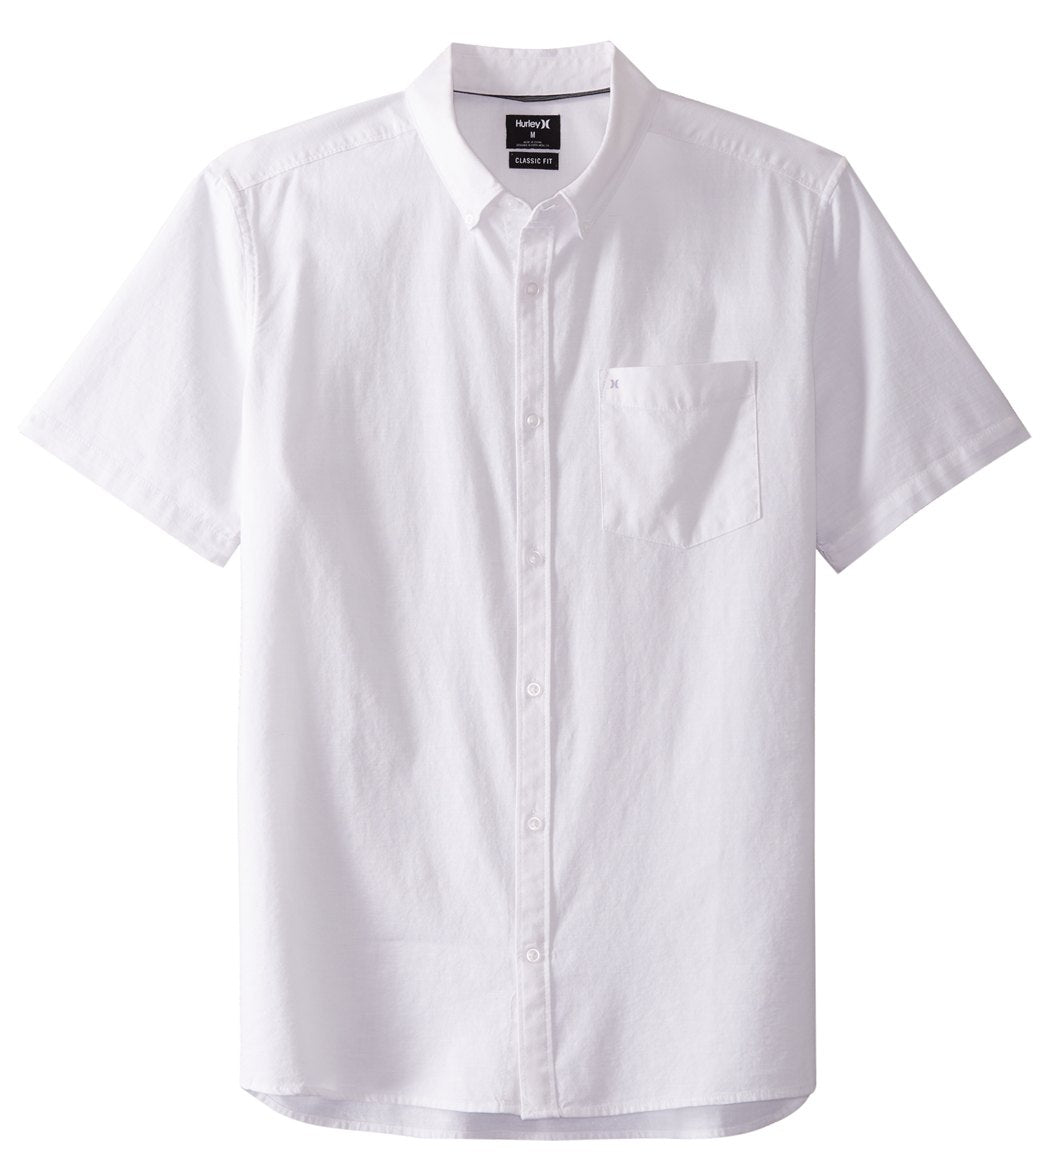 Hurley Mens One u0026 Only 2.0 Short Sleeve Woven Shirt